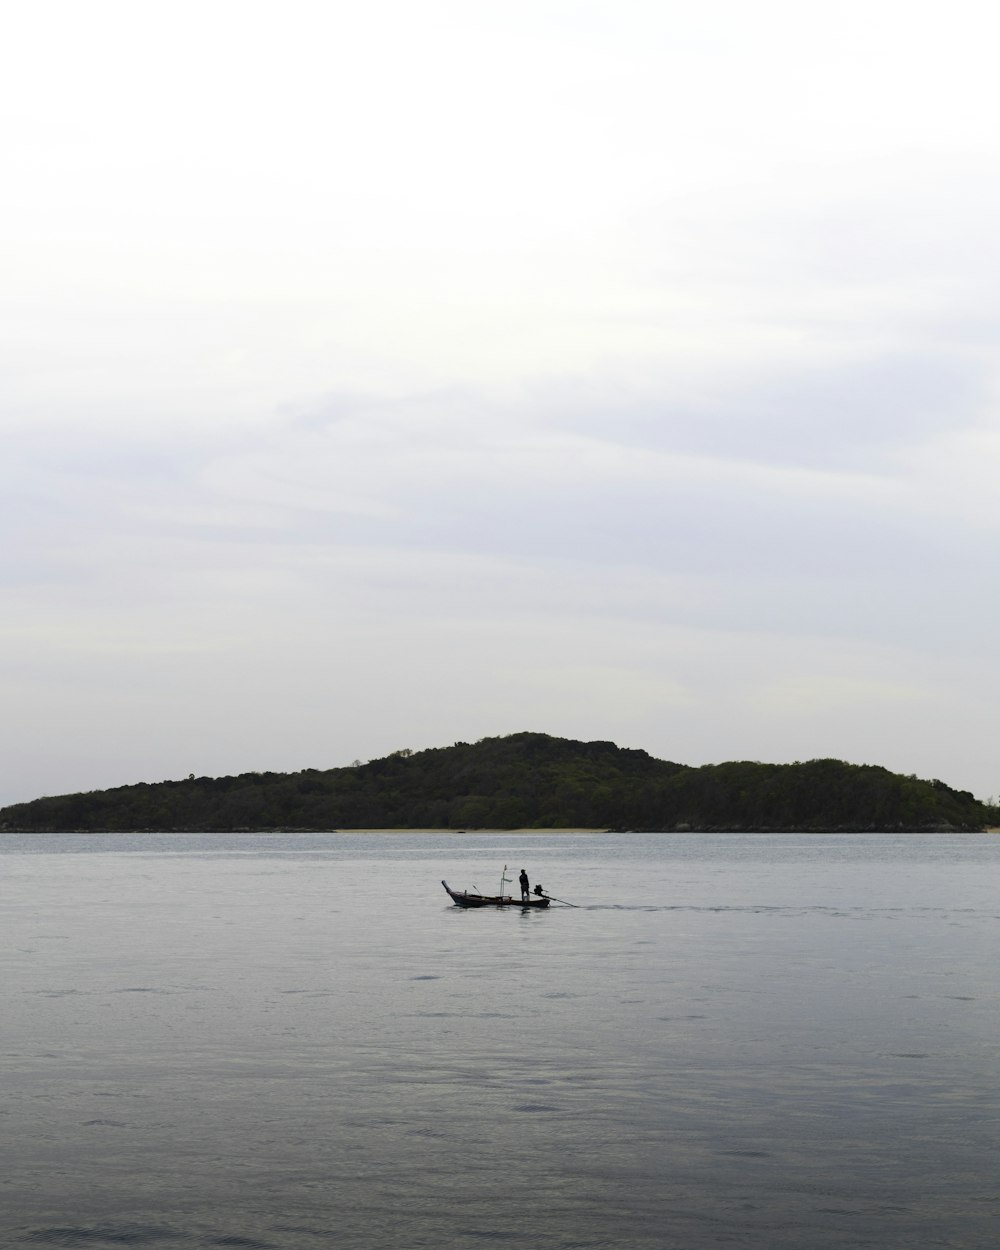 two people in a small boat on a large body of water